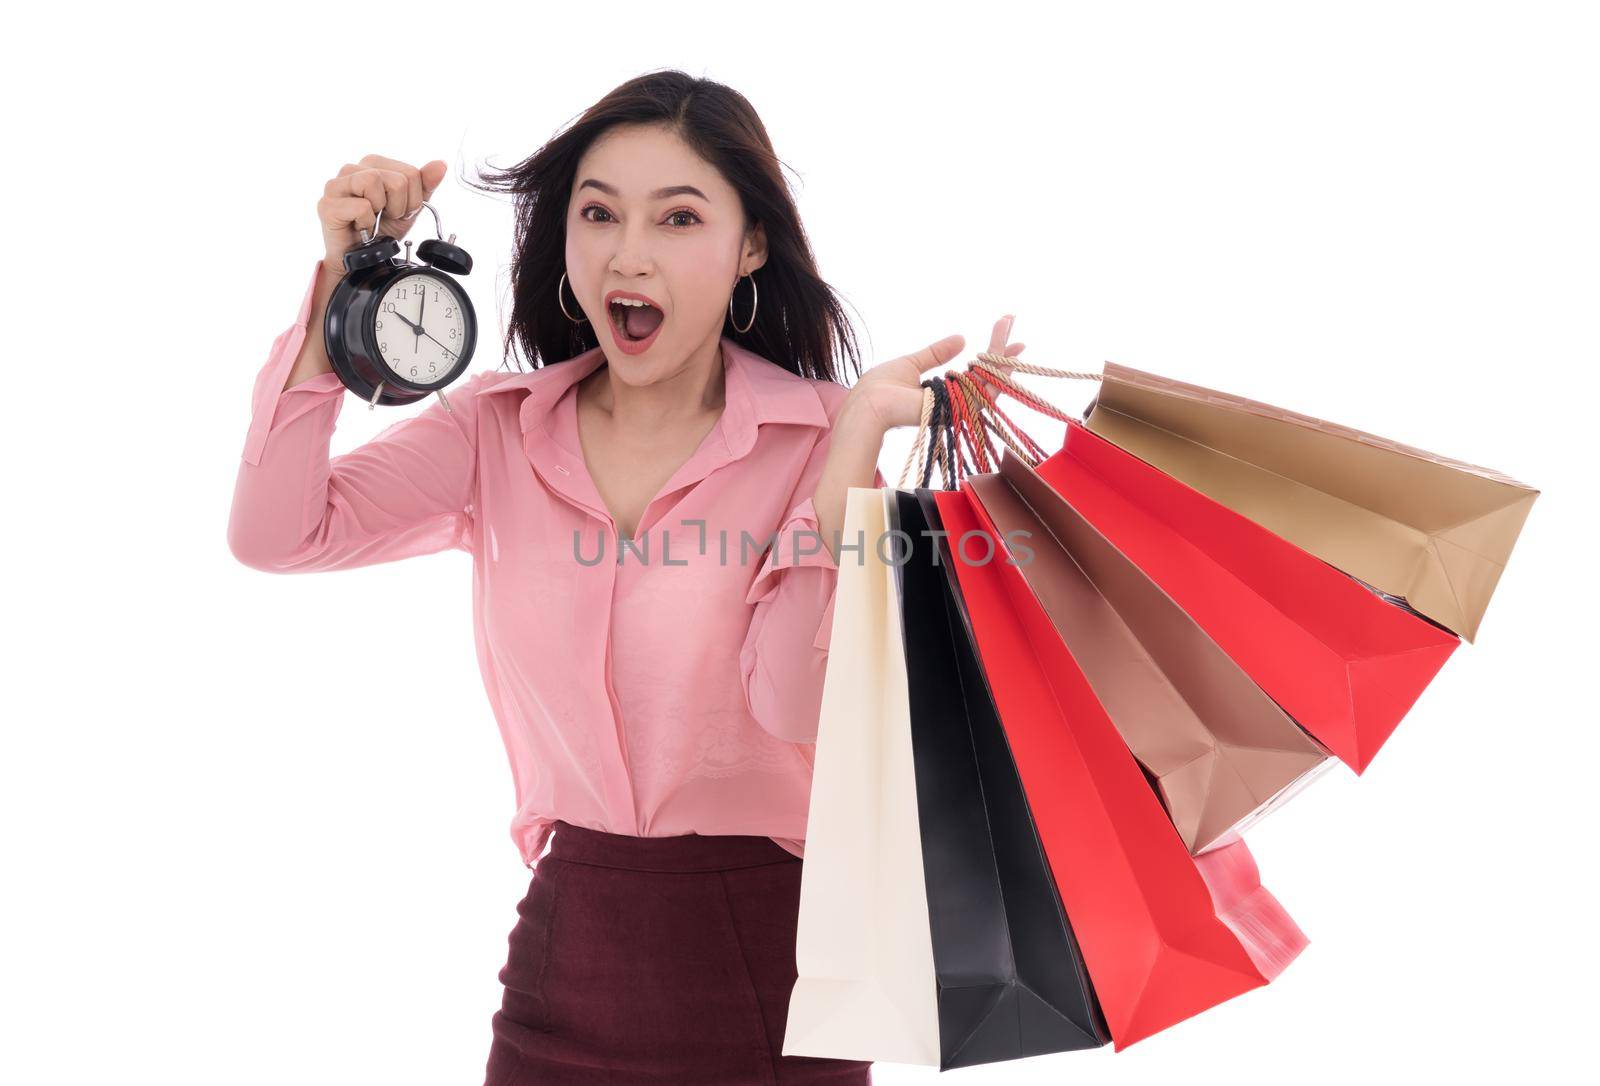 happy woman holding shopping bag and clock isolate on white background by geargodz